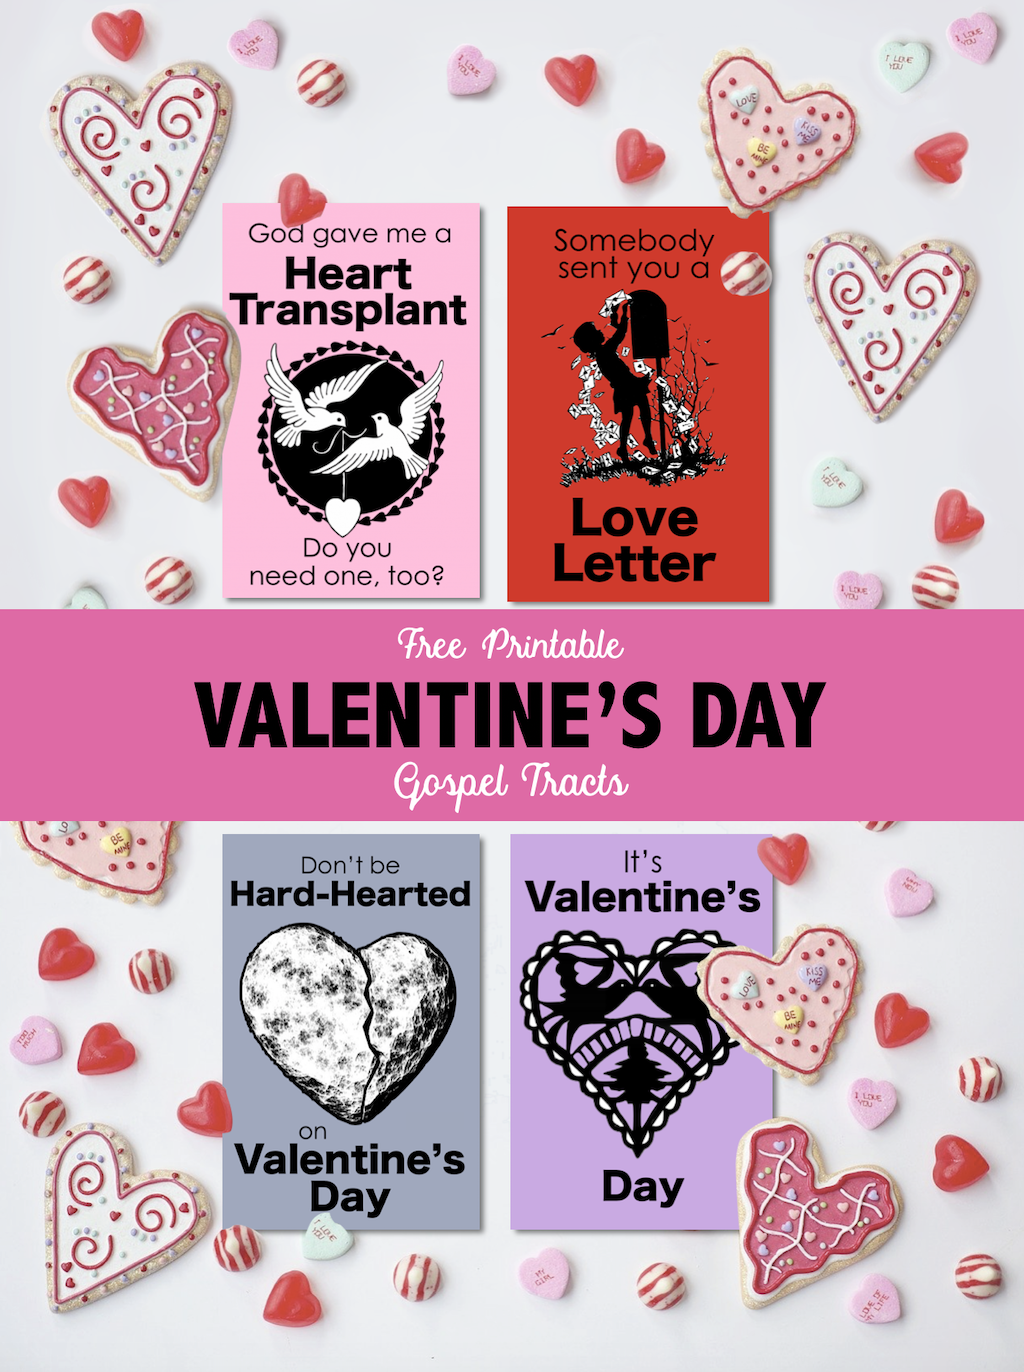 Gospel Tracts for Valentine's Day 